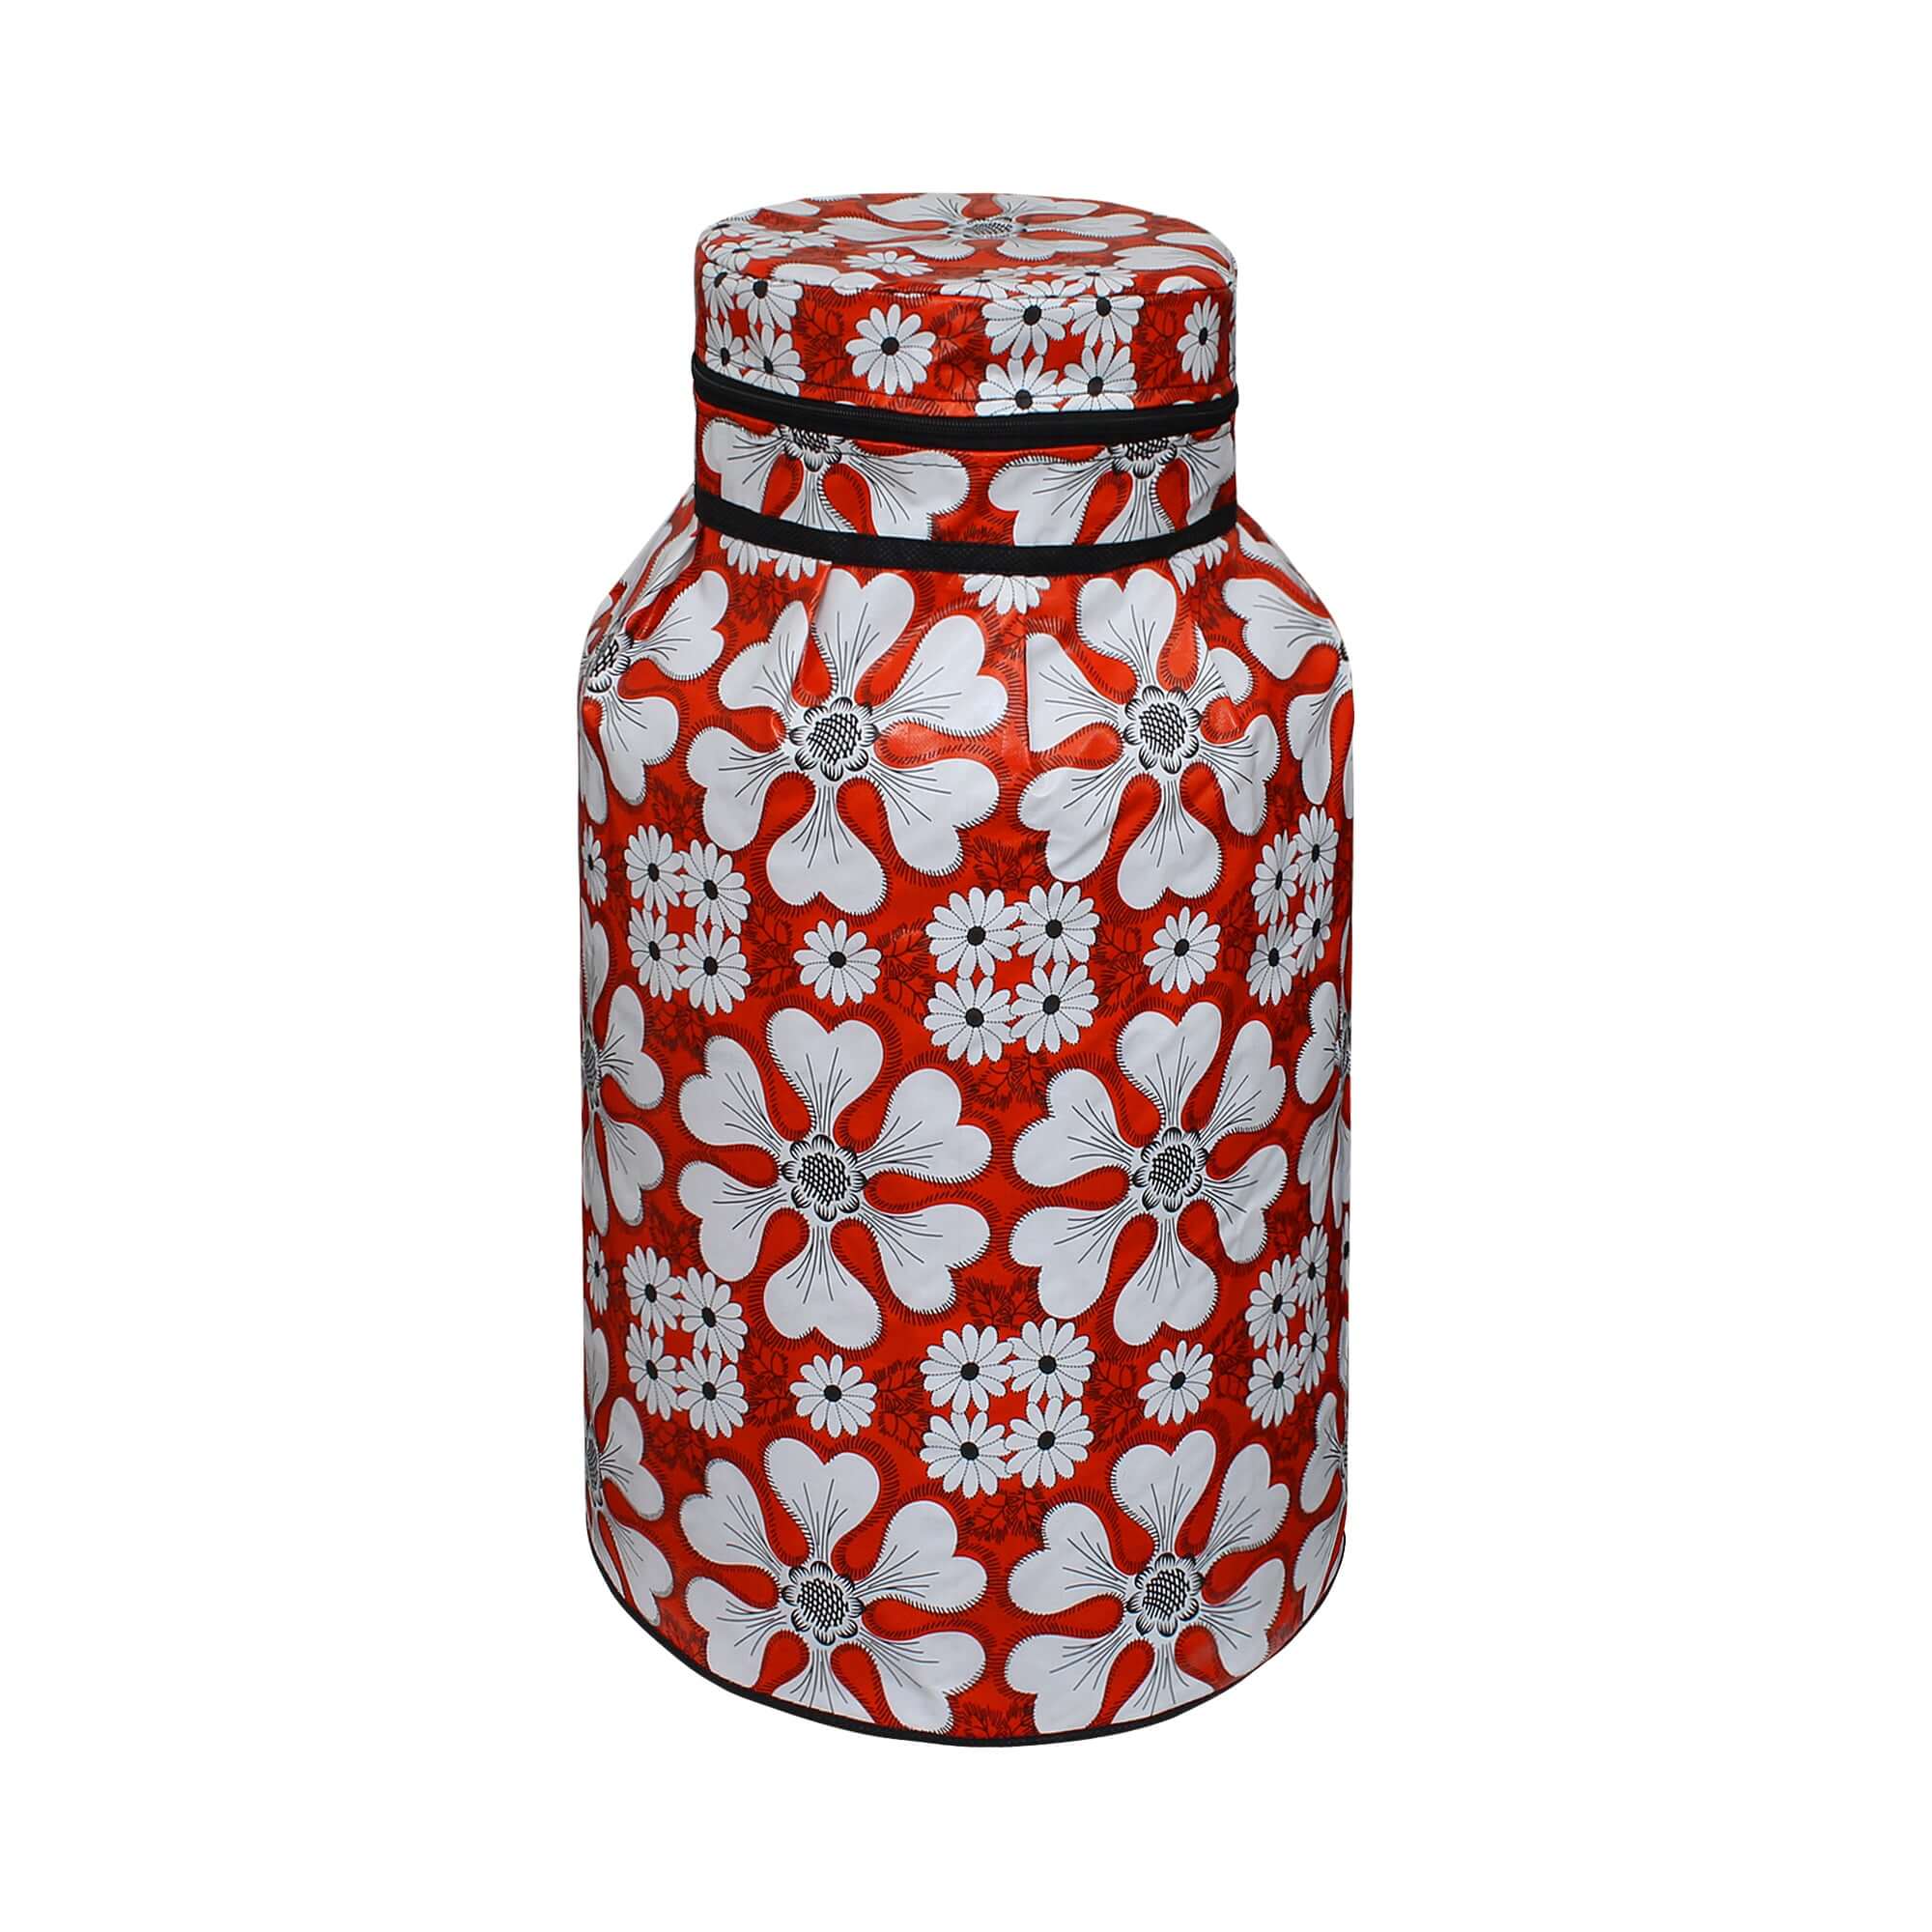 LPG Gas Cylinder Cover, SA60 - Dream Care Furnishings Private Limited